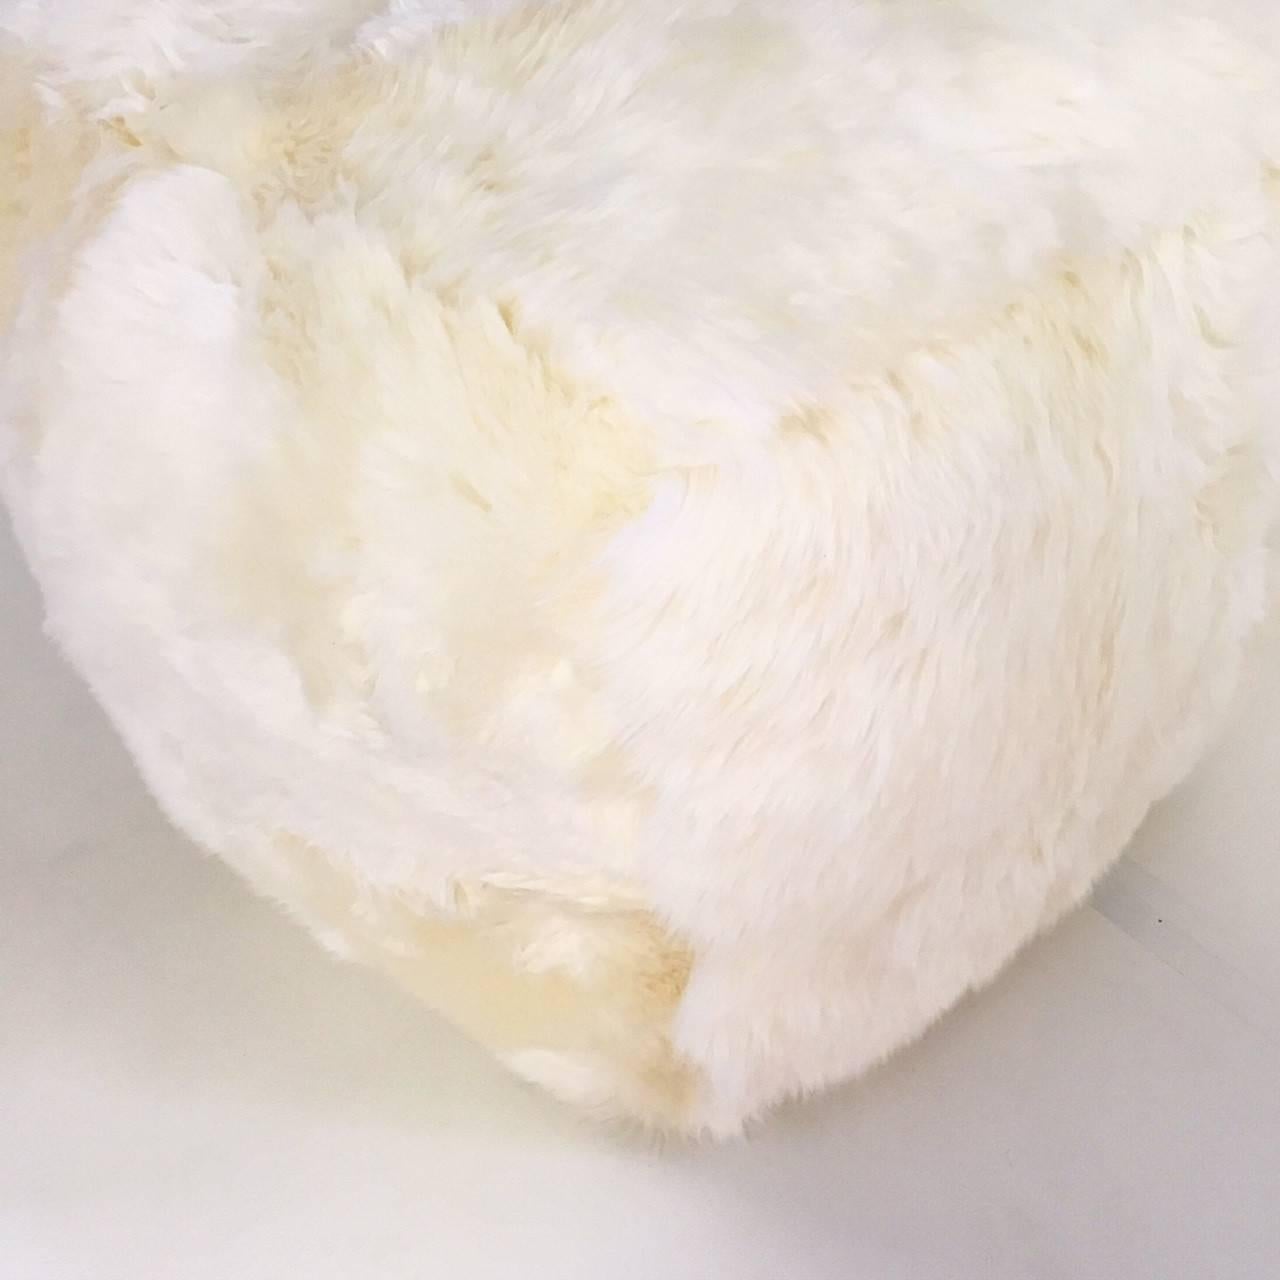 Our beautiful, luxurious, softer than a cloud sheepskin cube is handcrafted from our New Zealand sheepskins. The cube is roughly a 20 inch square. Our master upholsterers crafted the cube with no frame. The highest quality foam is used to hold shape